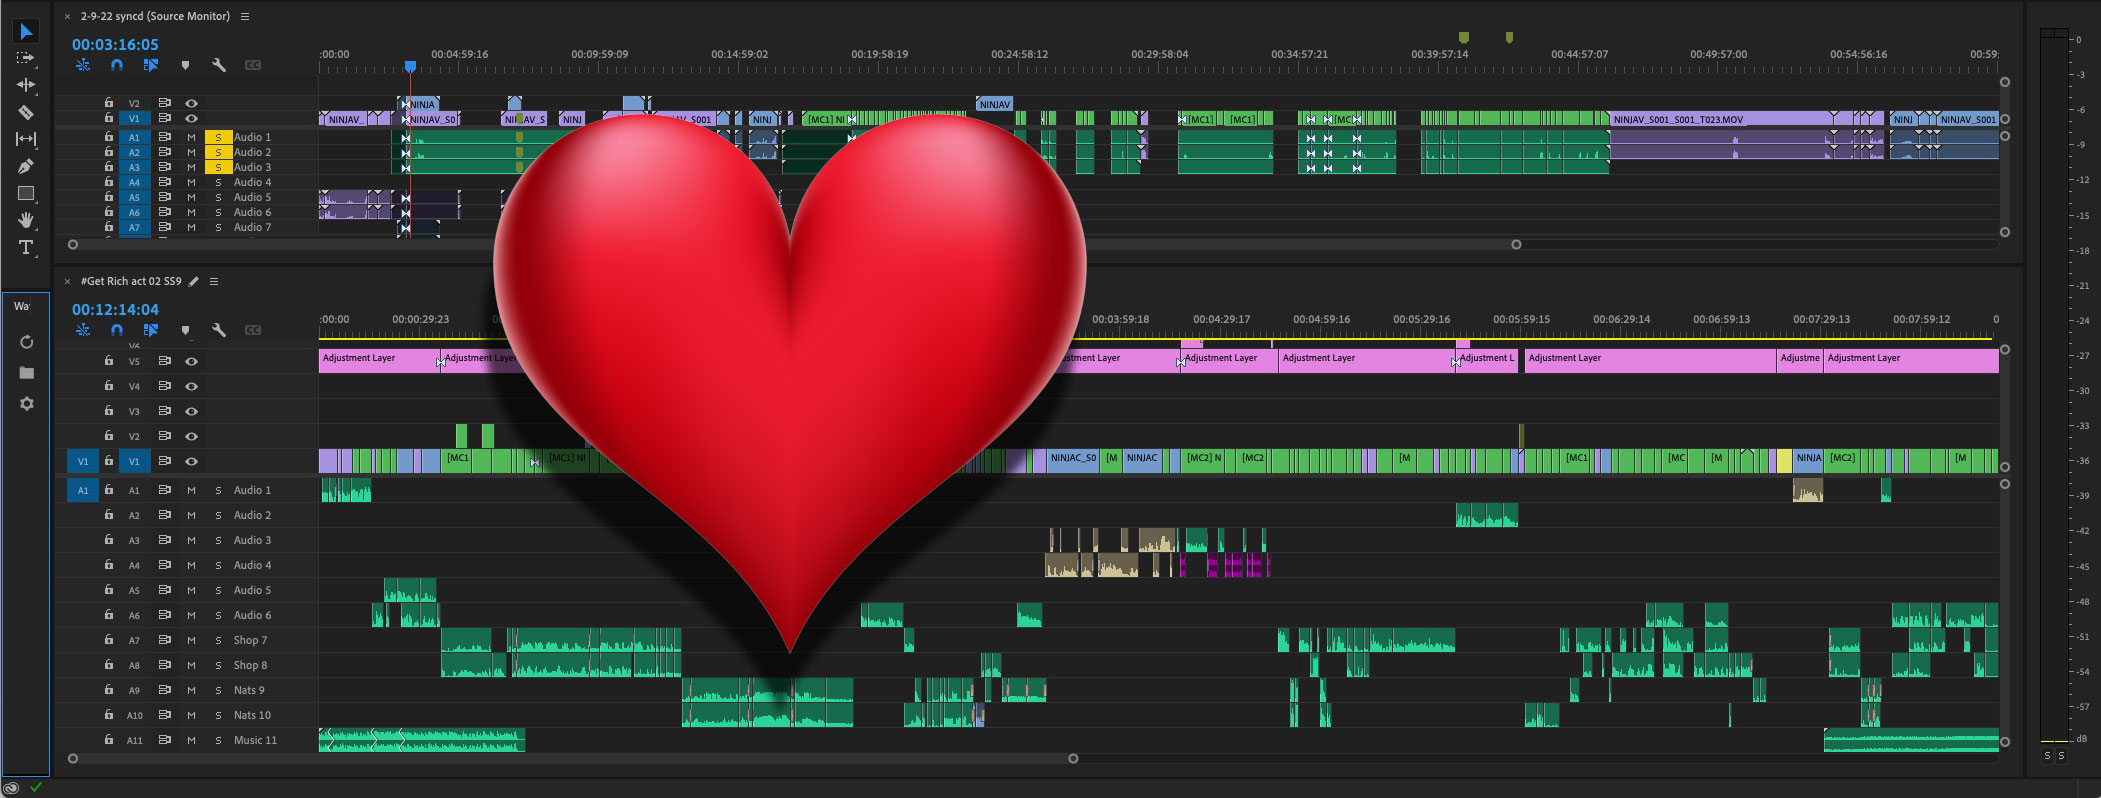 My single most loved feature in Adobe Premiere Pro 64